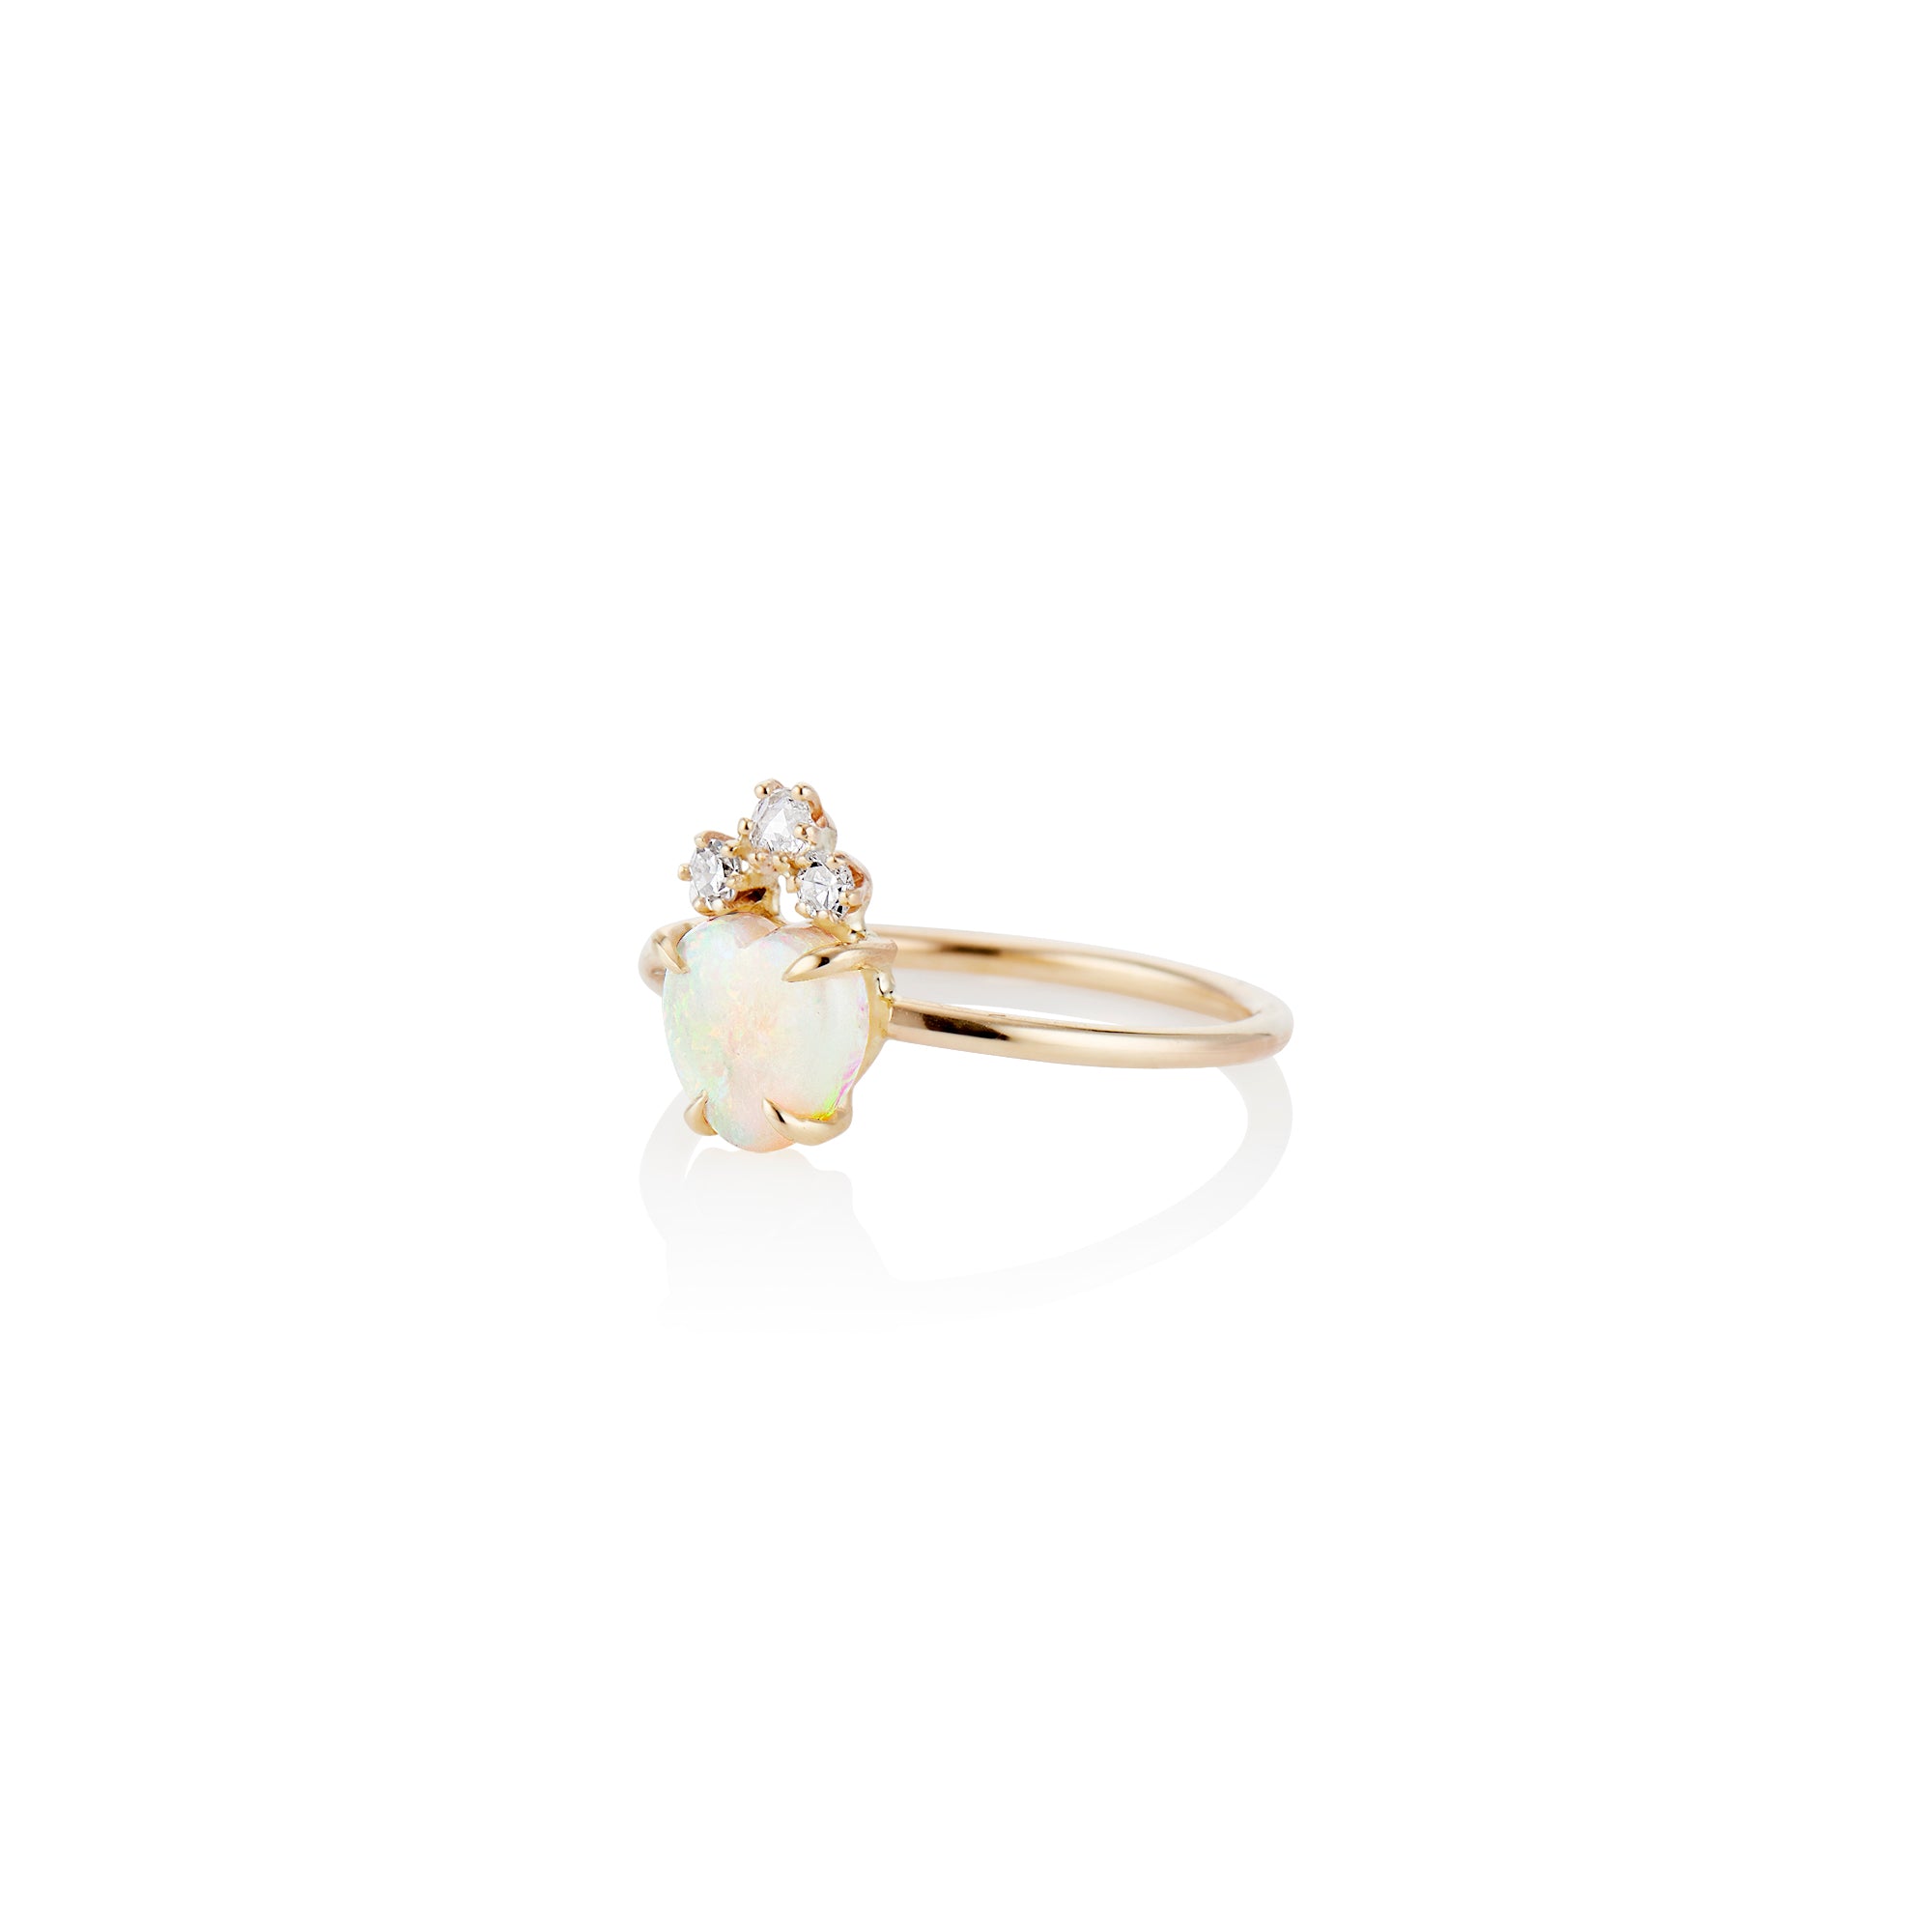 Tiny Crowned Heart Ring - Charlie and Marcelle